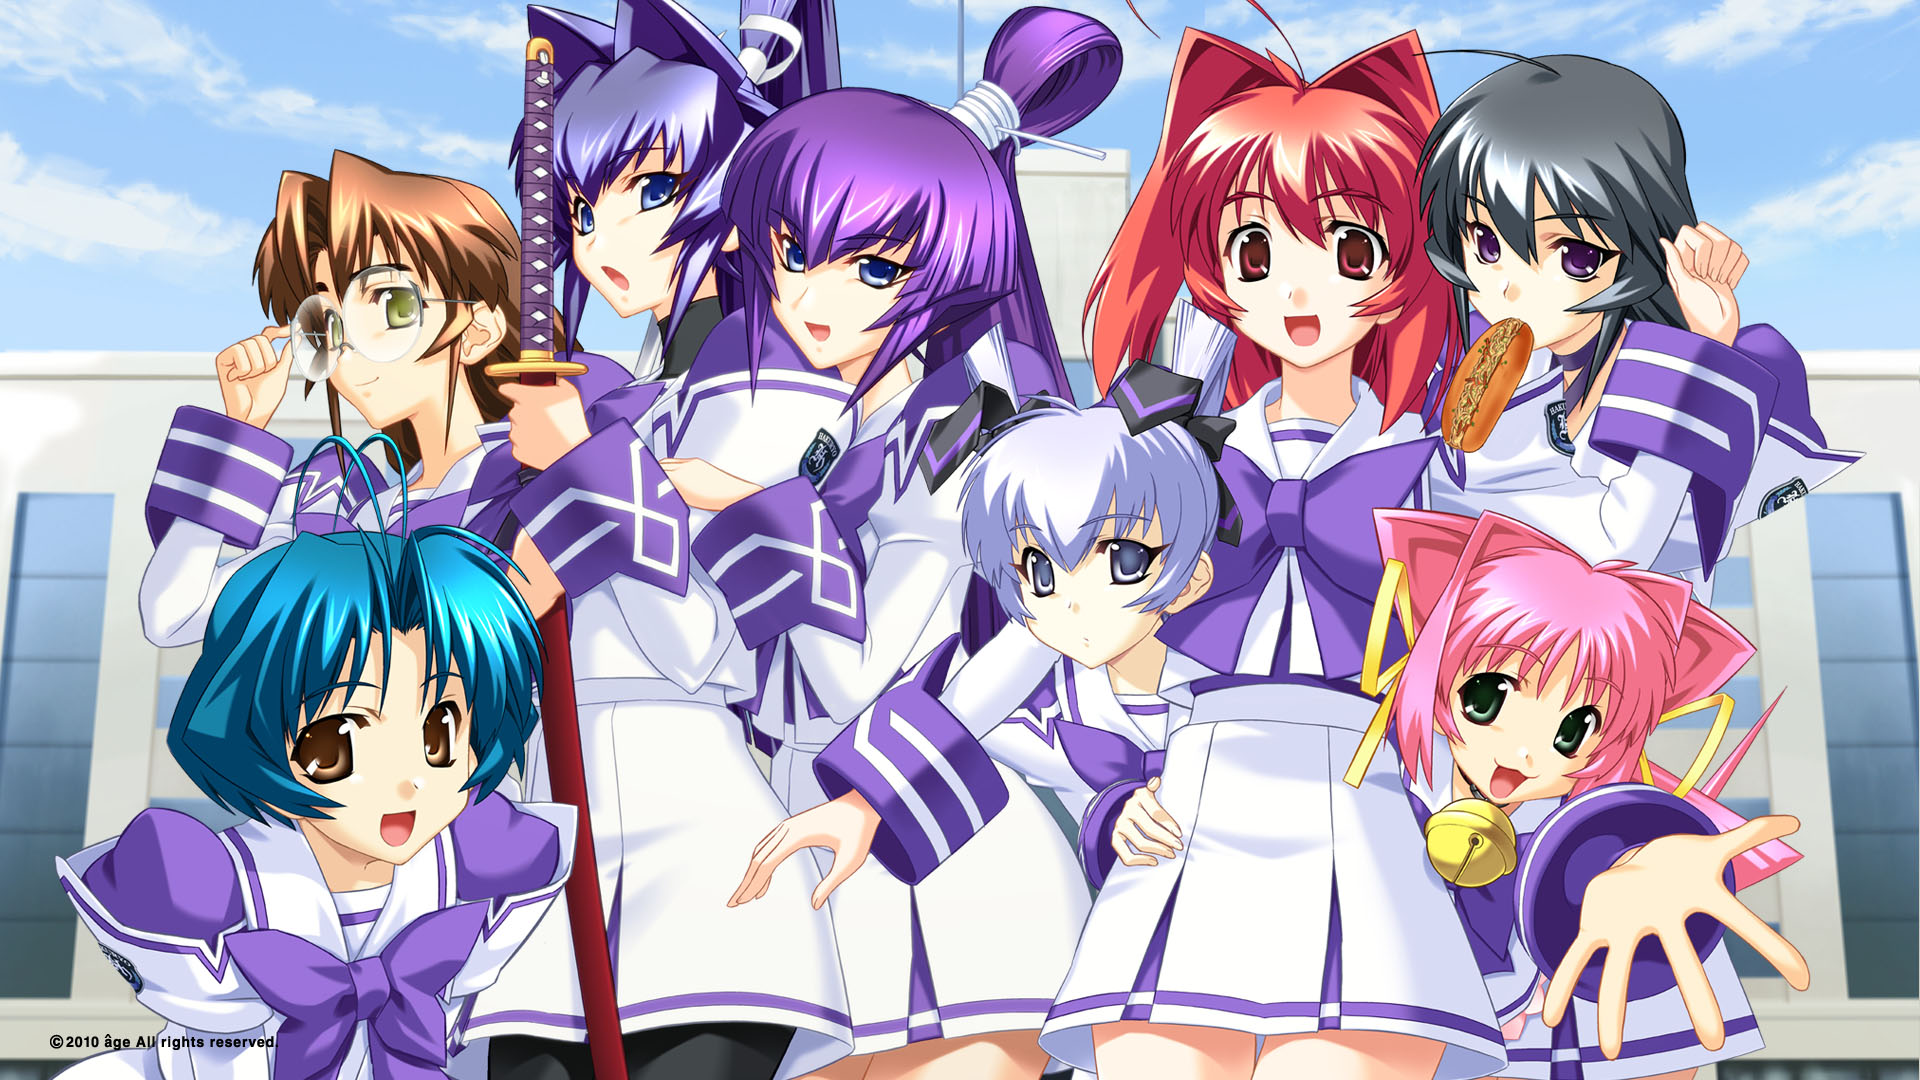 Muv-Luv Alternative Hd Characters Wallpapers